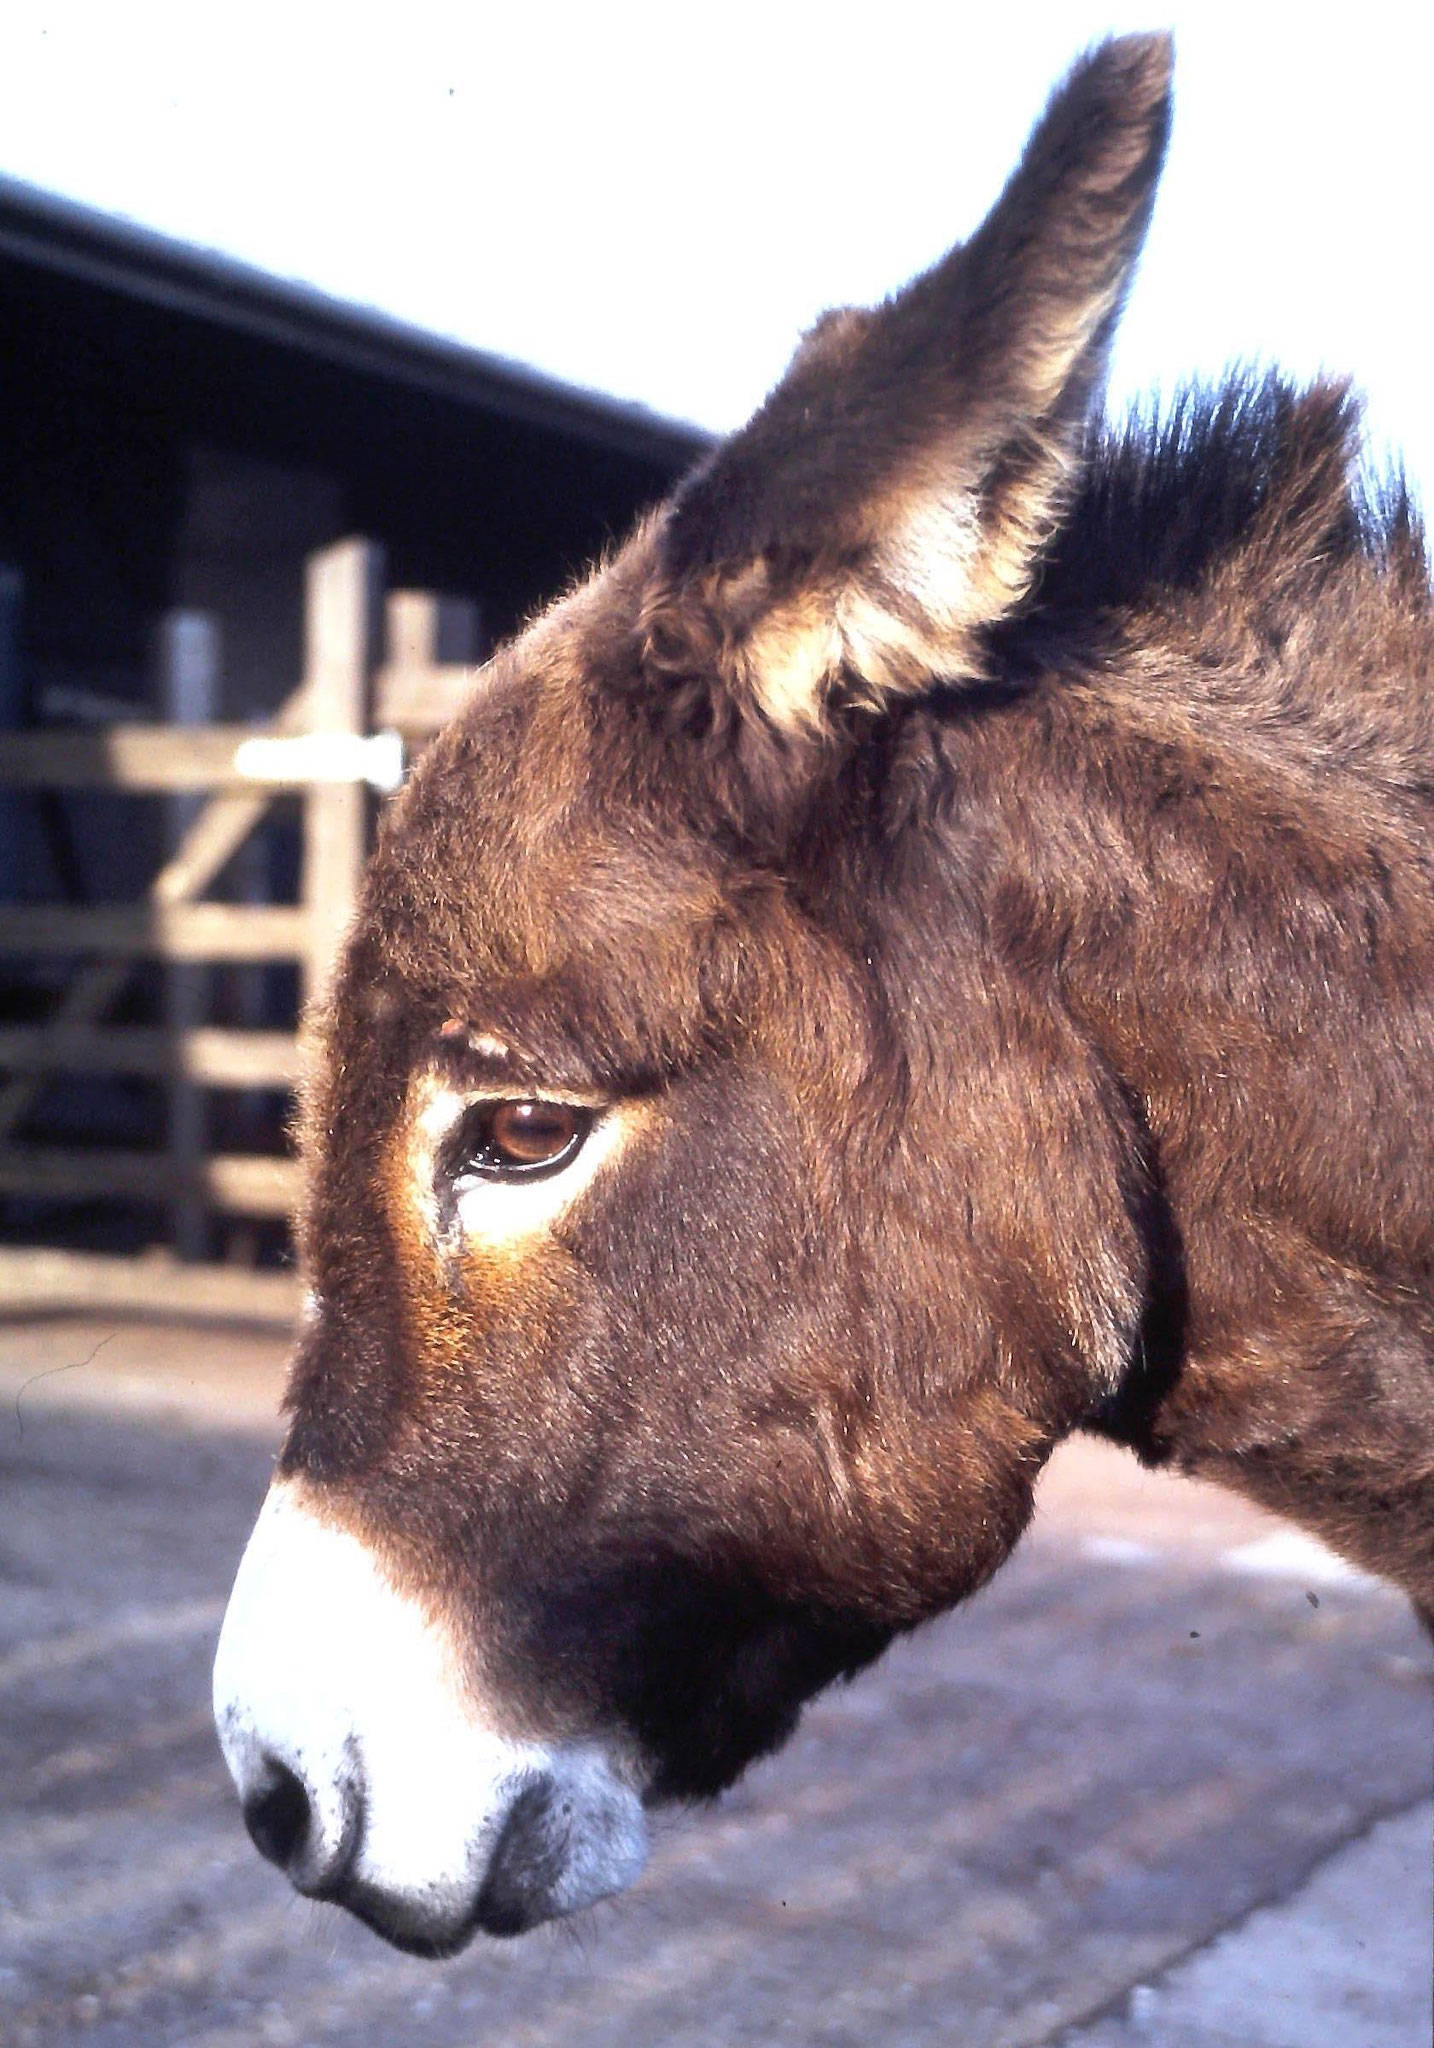 Donkey Sanctuary 1995: jack to be castrated